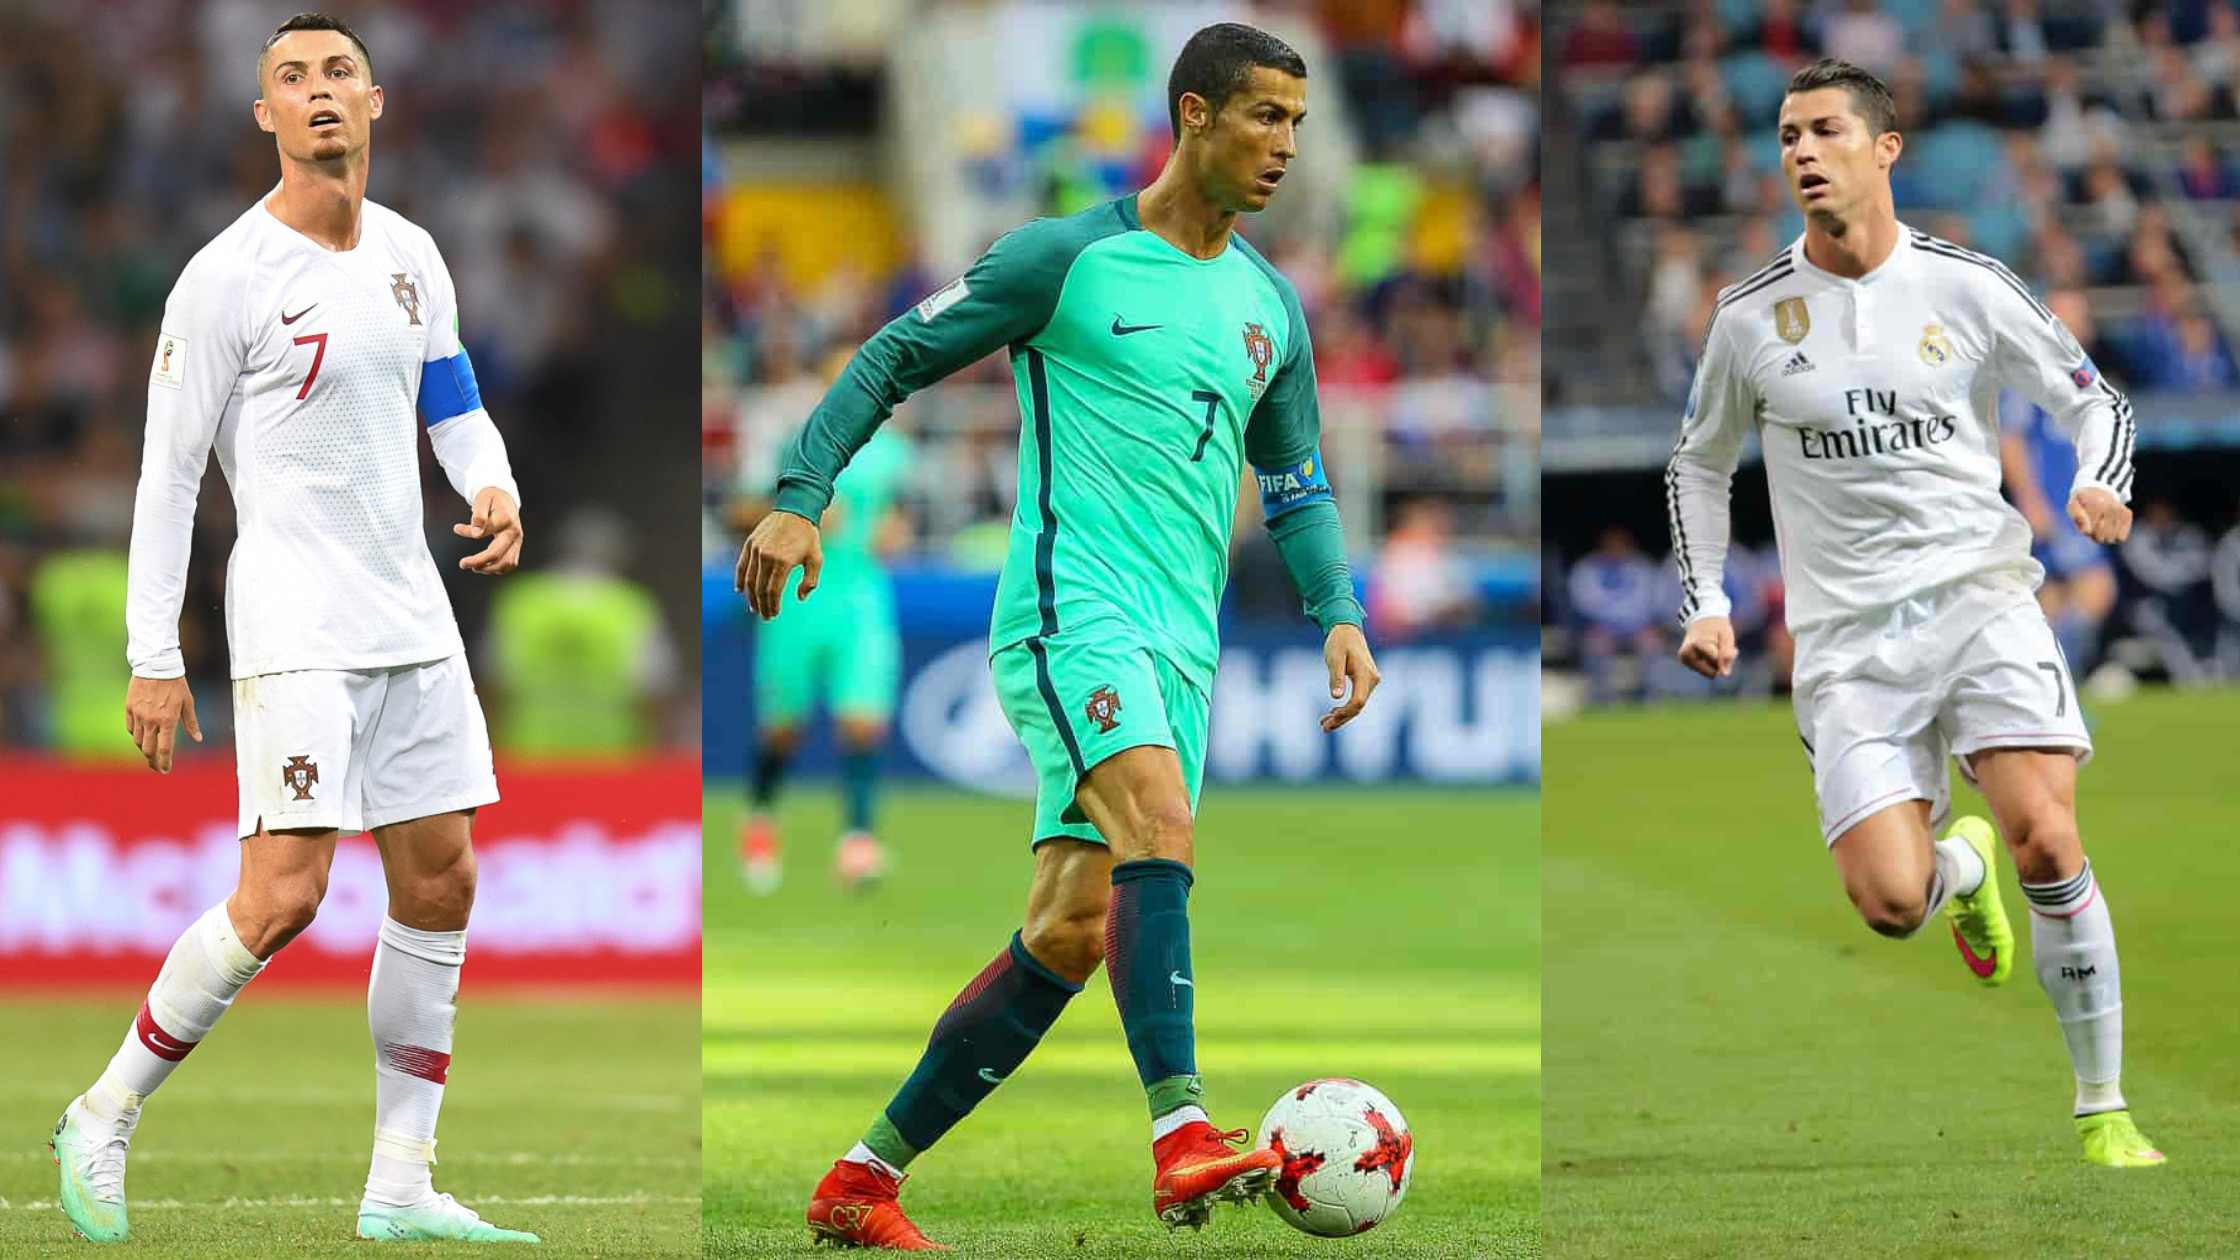 A Dedication and Excellence Journey of Cristiano Ronaldo